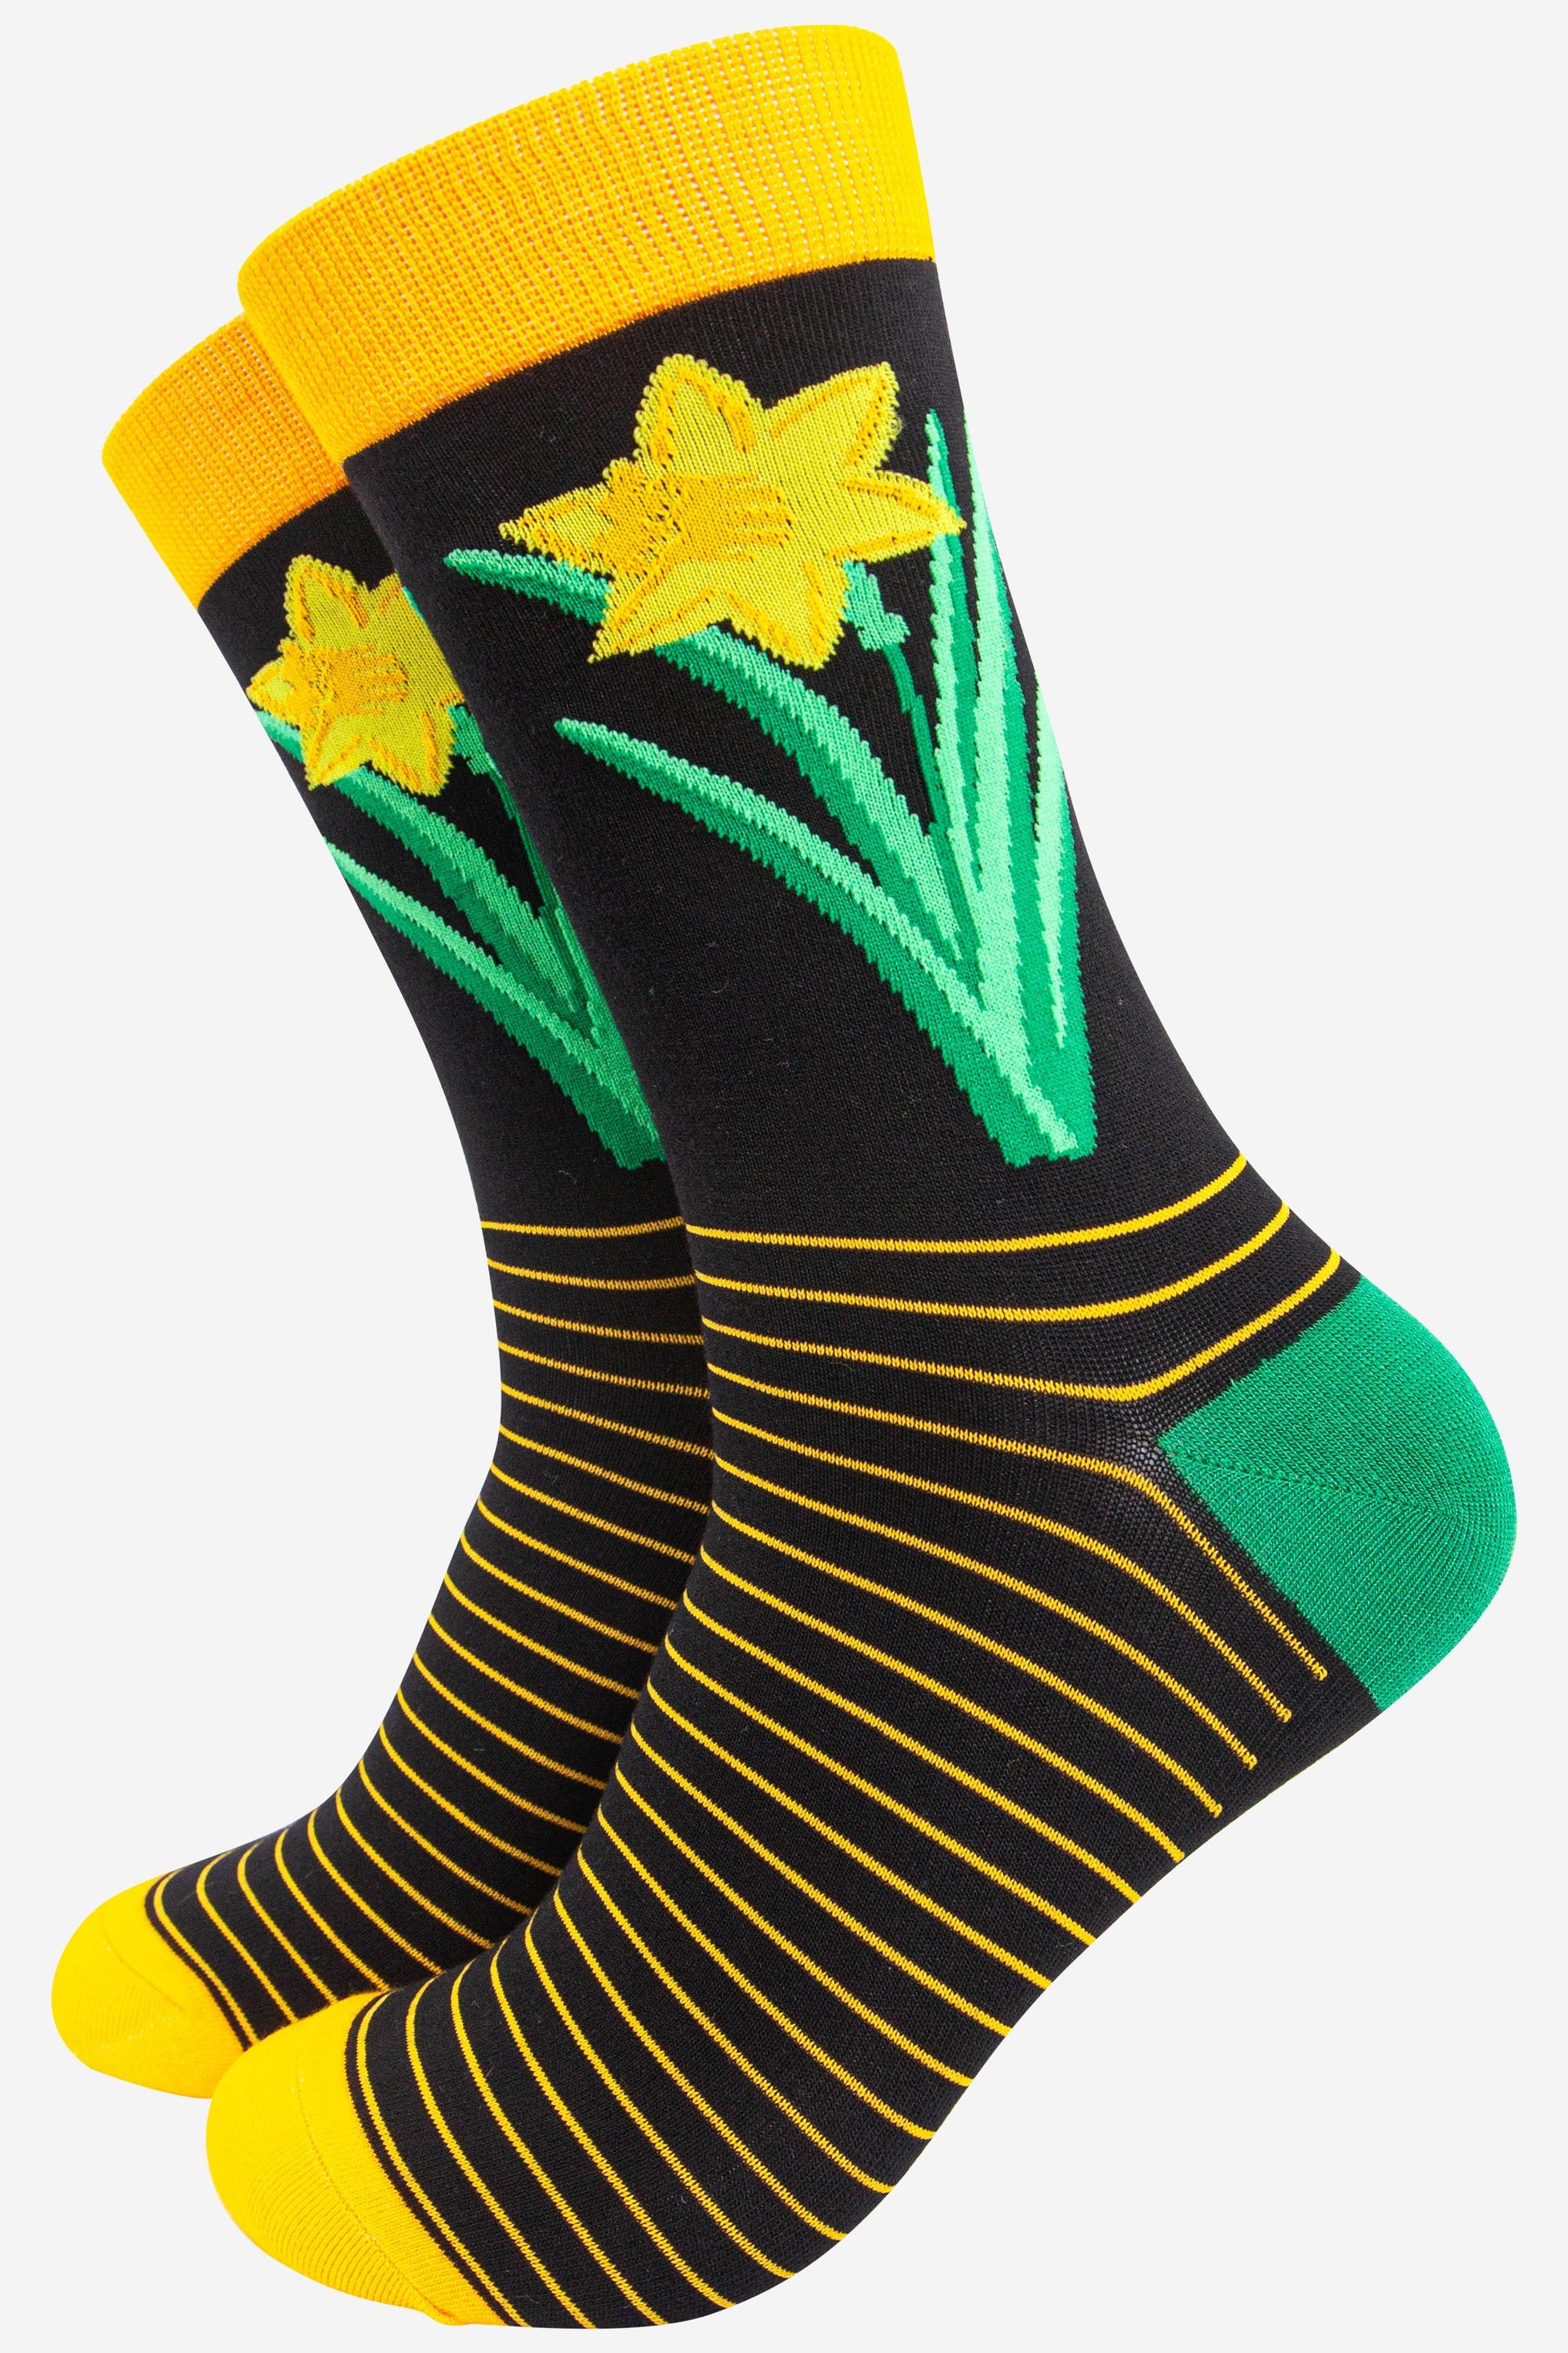 mens black and yellow striped bamboo socks with a large yellow daffodil motif